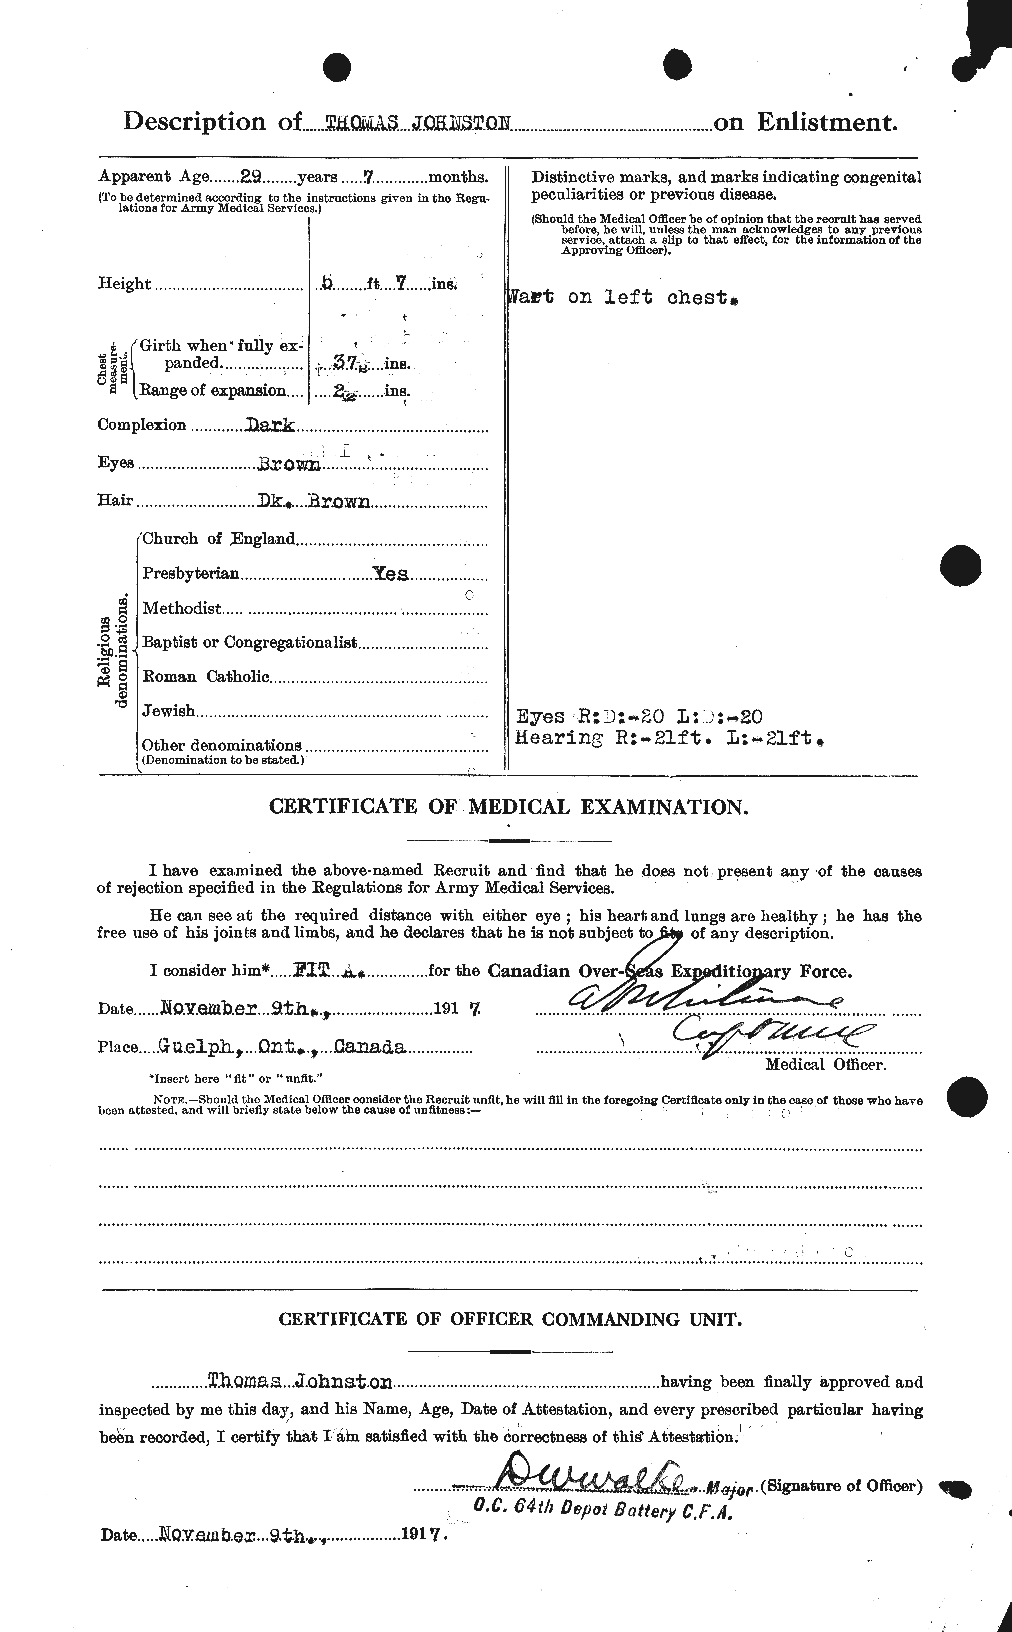 Personnel Records of the First World War - CEF 427146b